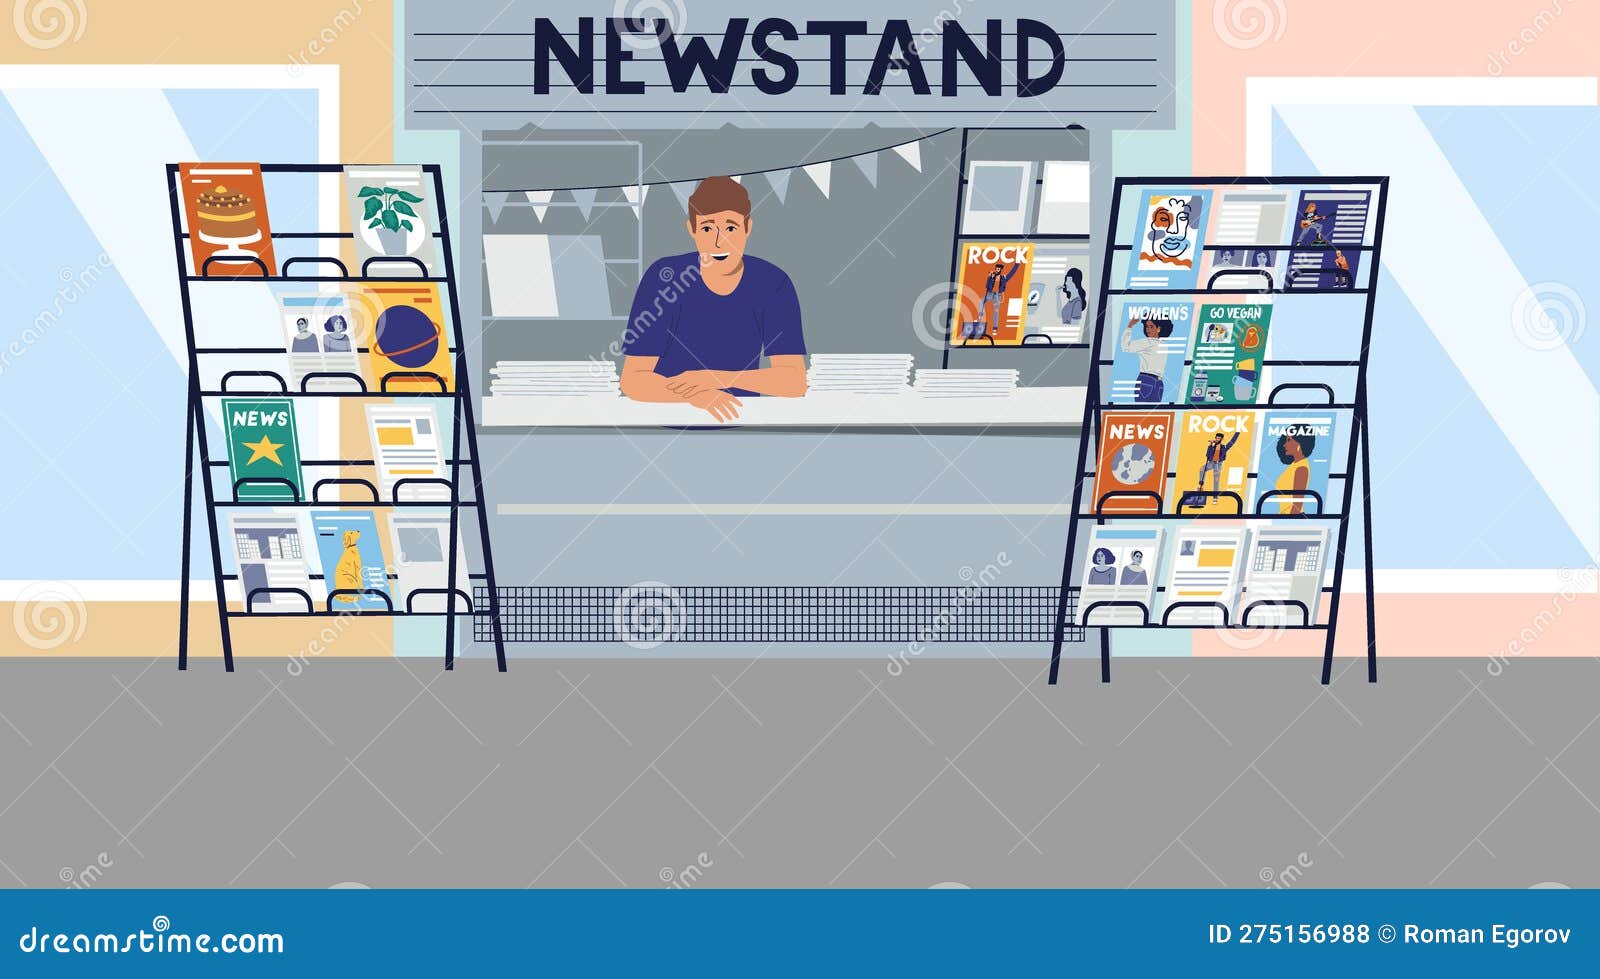 Small Business. Newspapers and Magazines Trading. Salesman at Street Shop  Counter. Outdoor Store Showcase Stock Vector - Illustration of store,  booth: 275156988